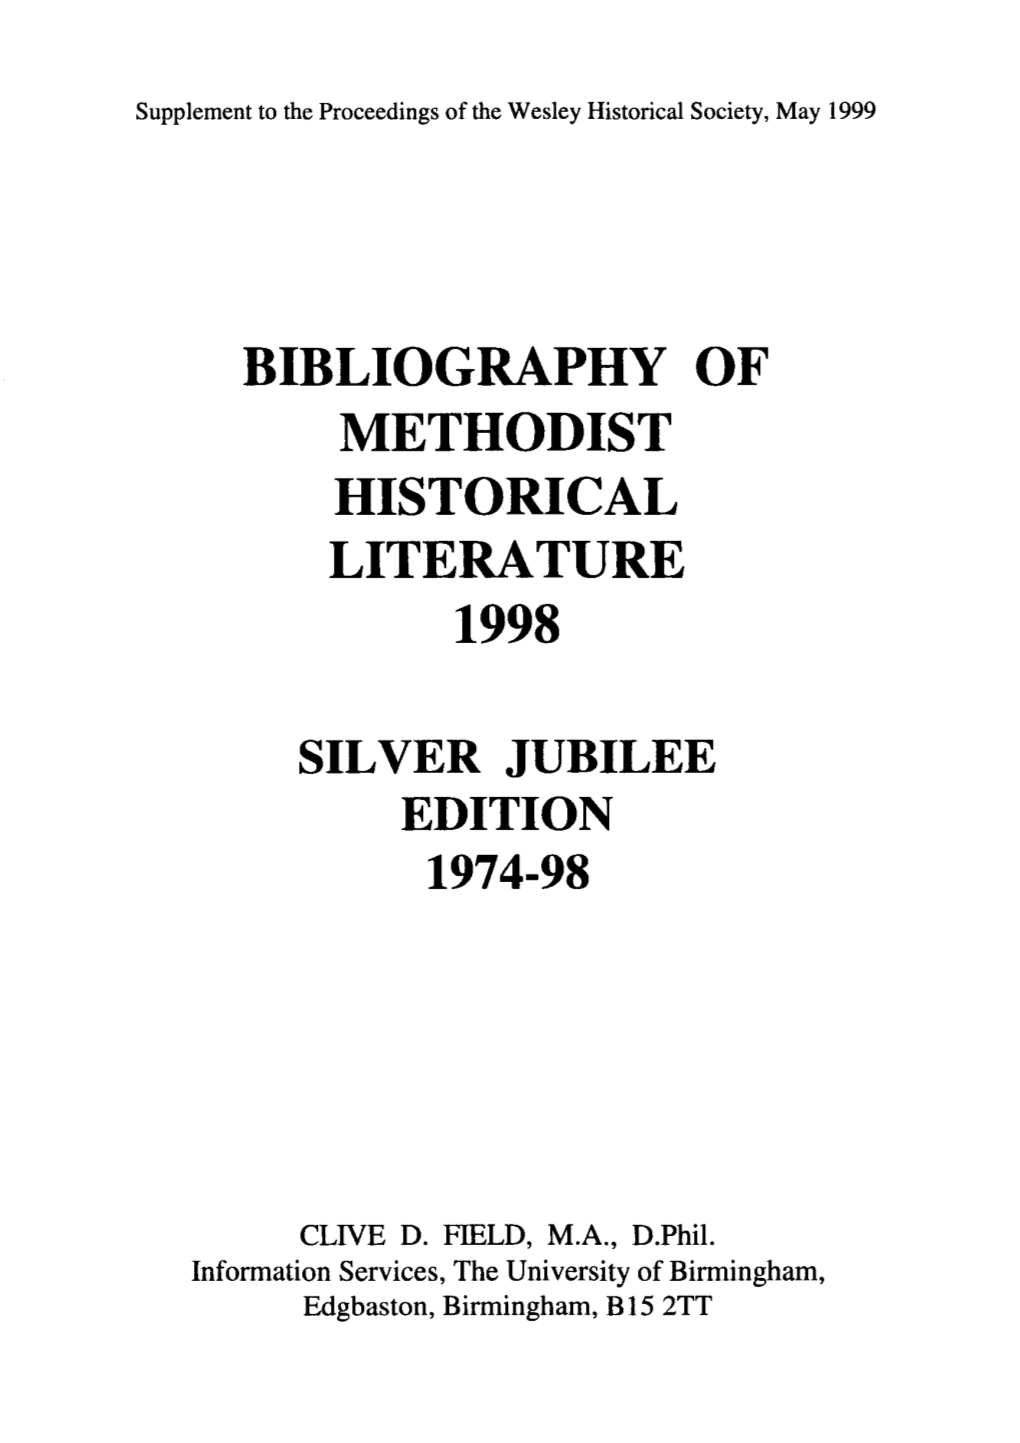 Clive D. Field, Bibliography of Methodist Historical Literature 1998